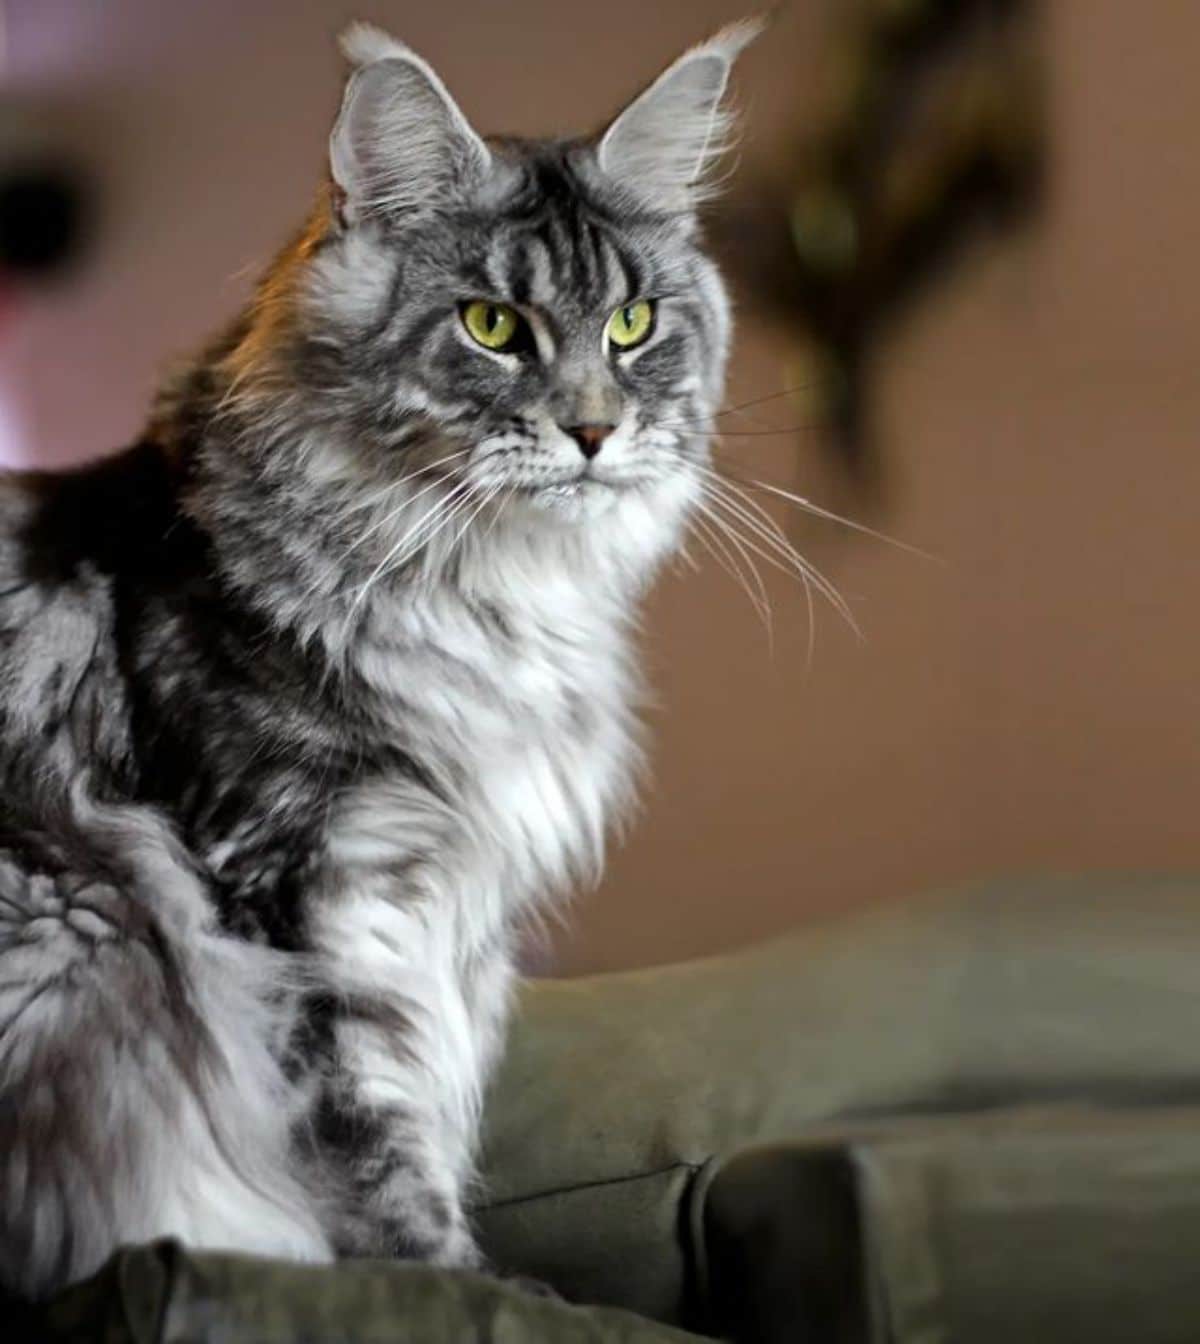 A fluffy gray maine coon sitting on a couch.